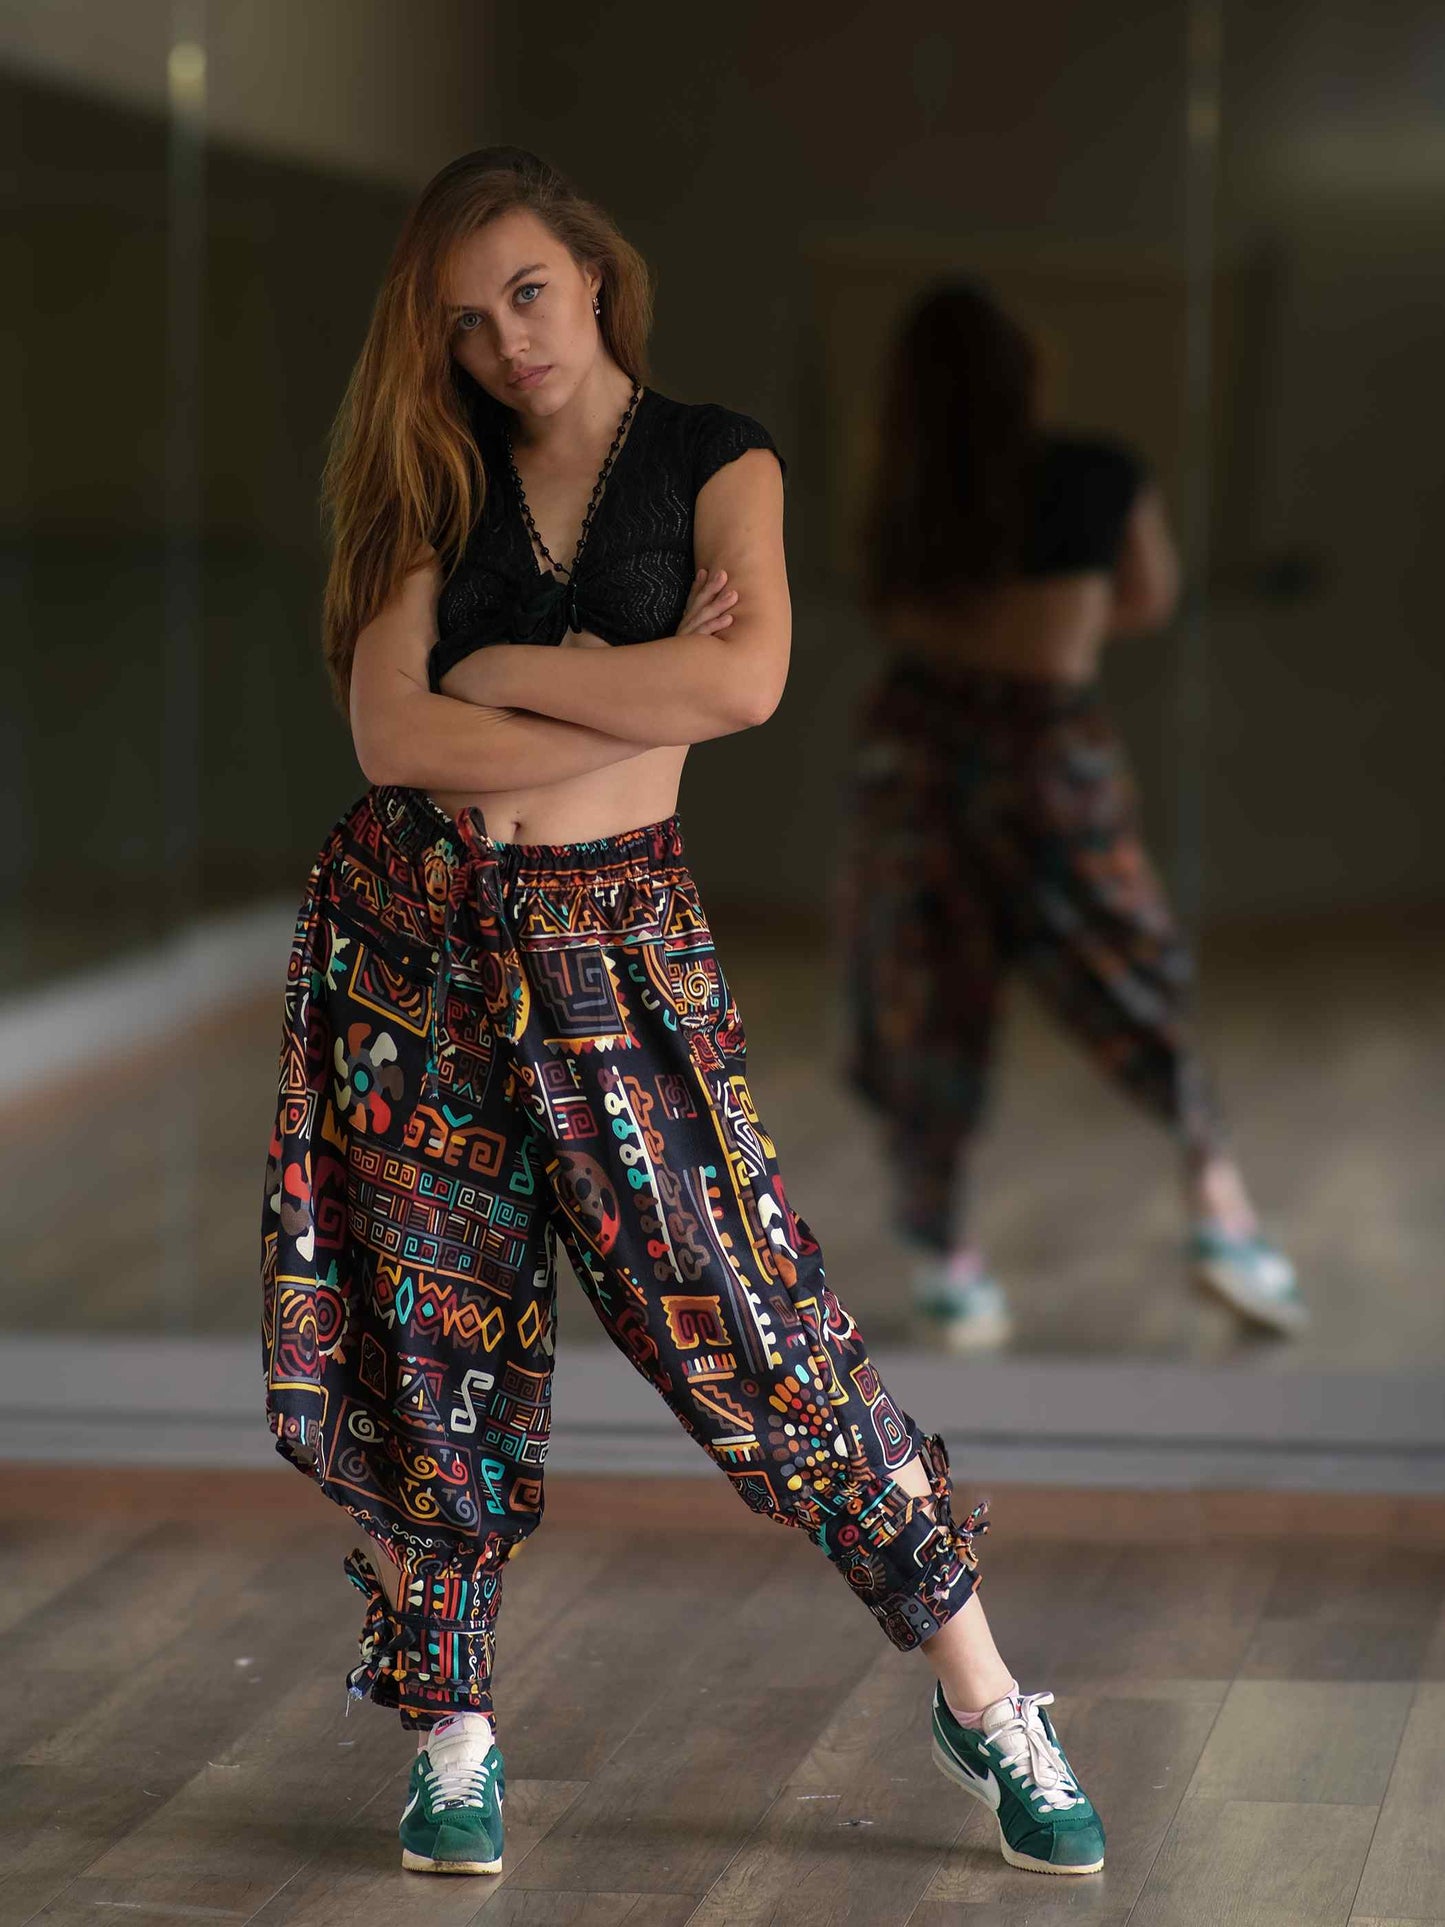 Women's Abstract Graphic Vintage Print Hippy Harem Pants For Dance Yoga